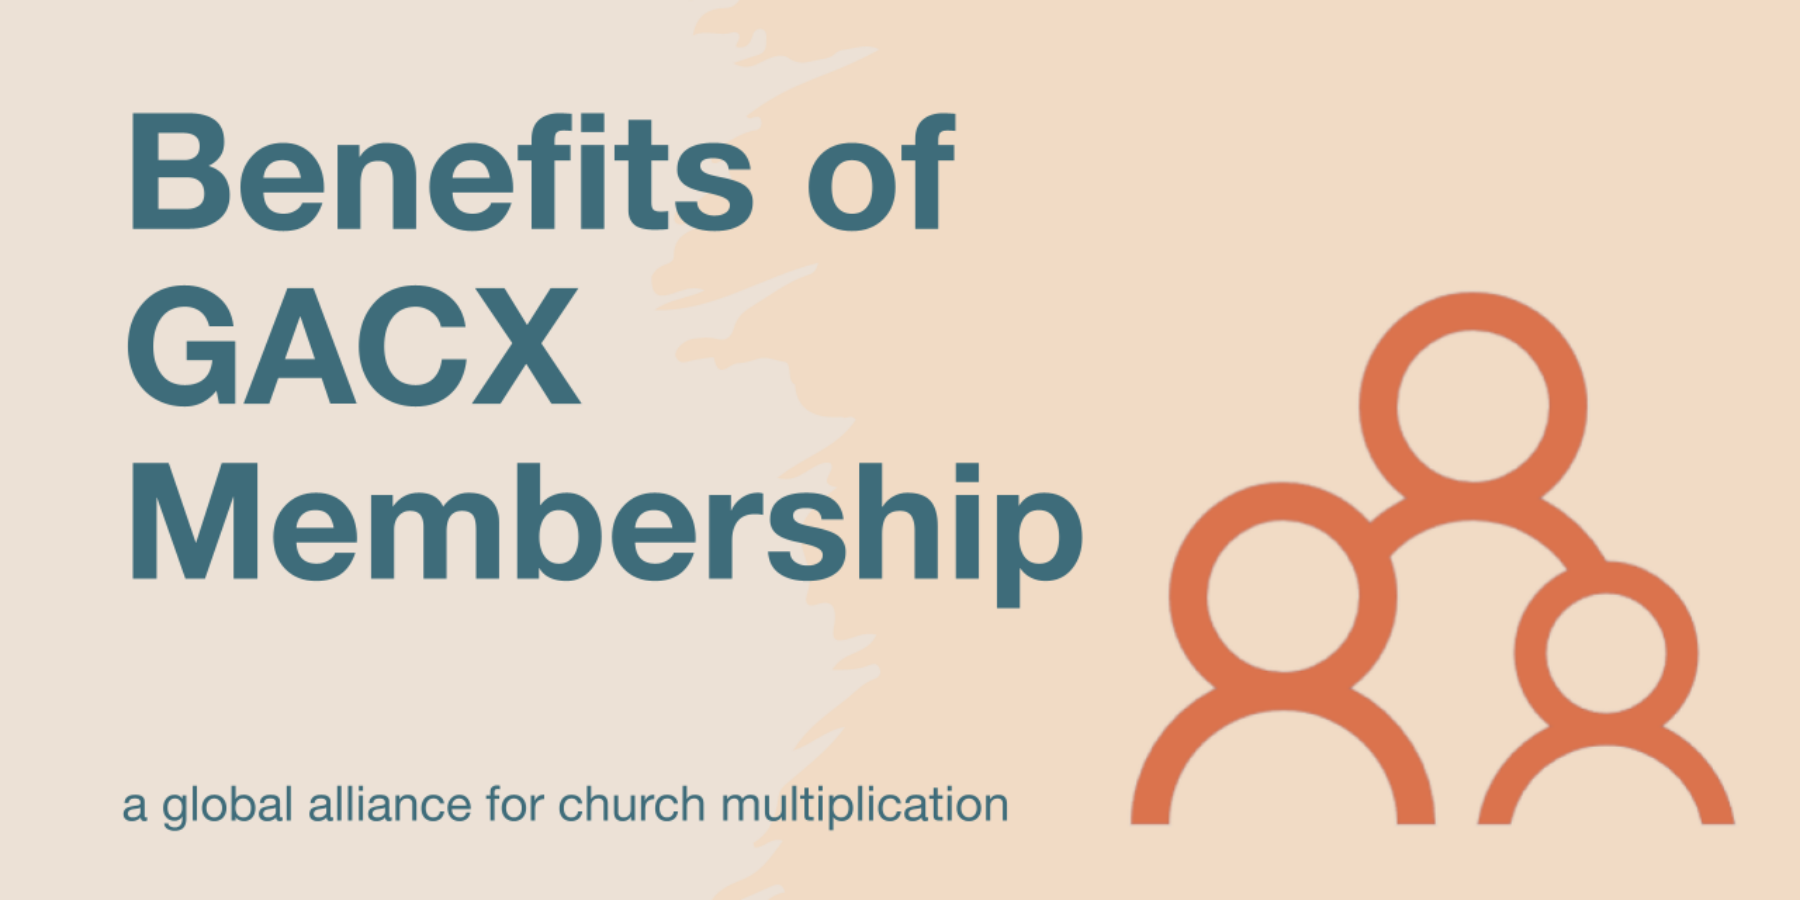 Top 10 Benefits of Membership in GACX: a global alliance for church multiplication